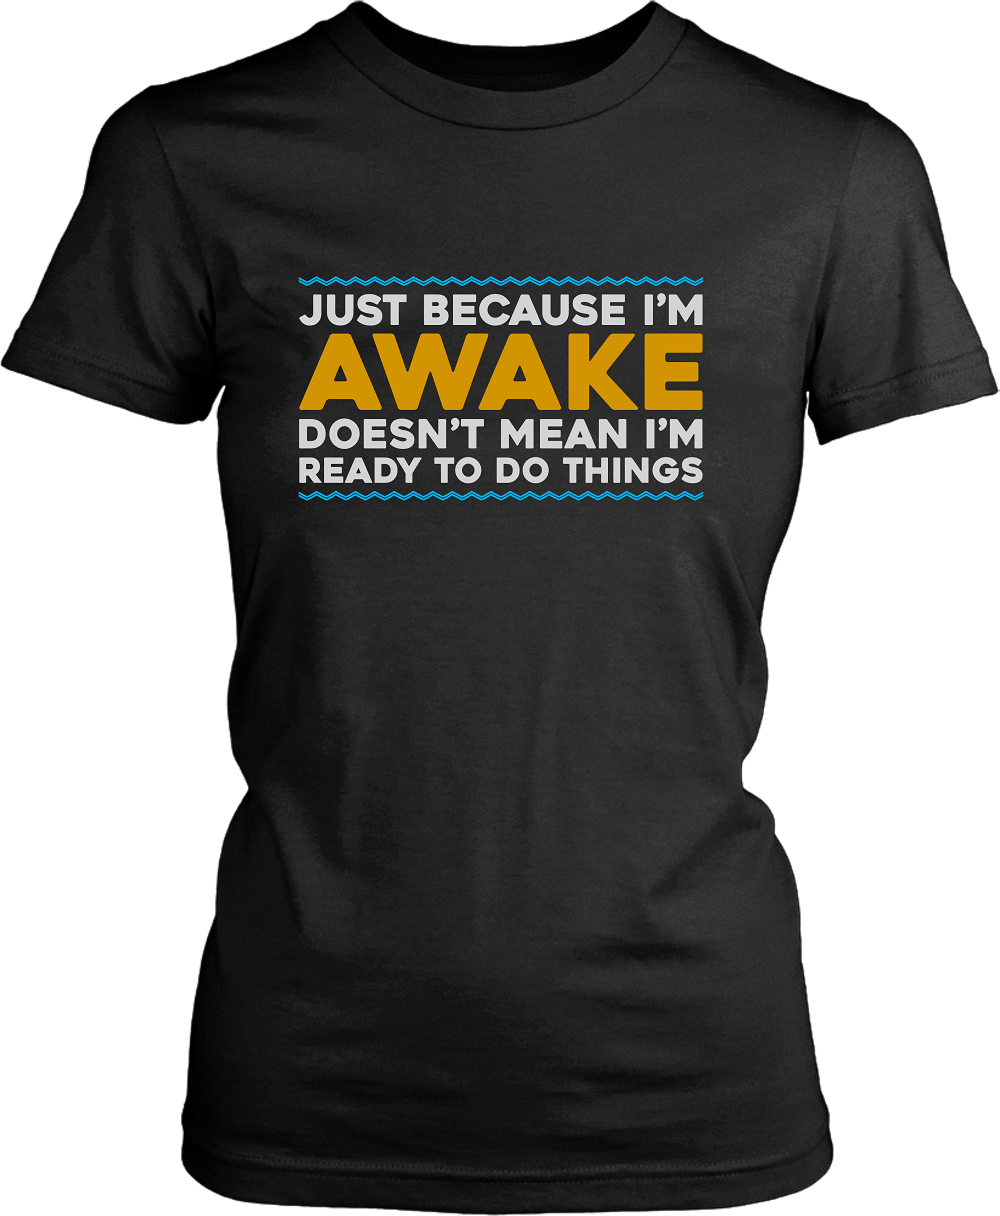 Just Because I'm Awake, Doesn't Mean I'm Ready To Do Things funny Tees